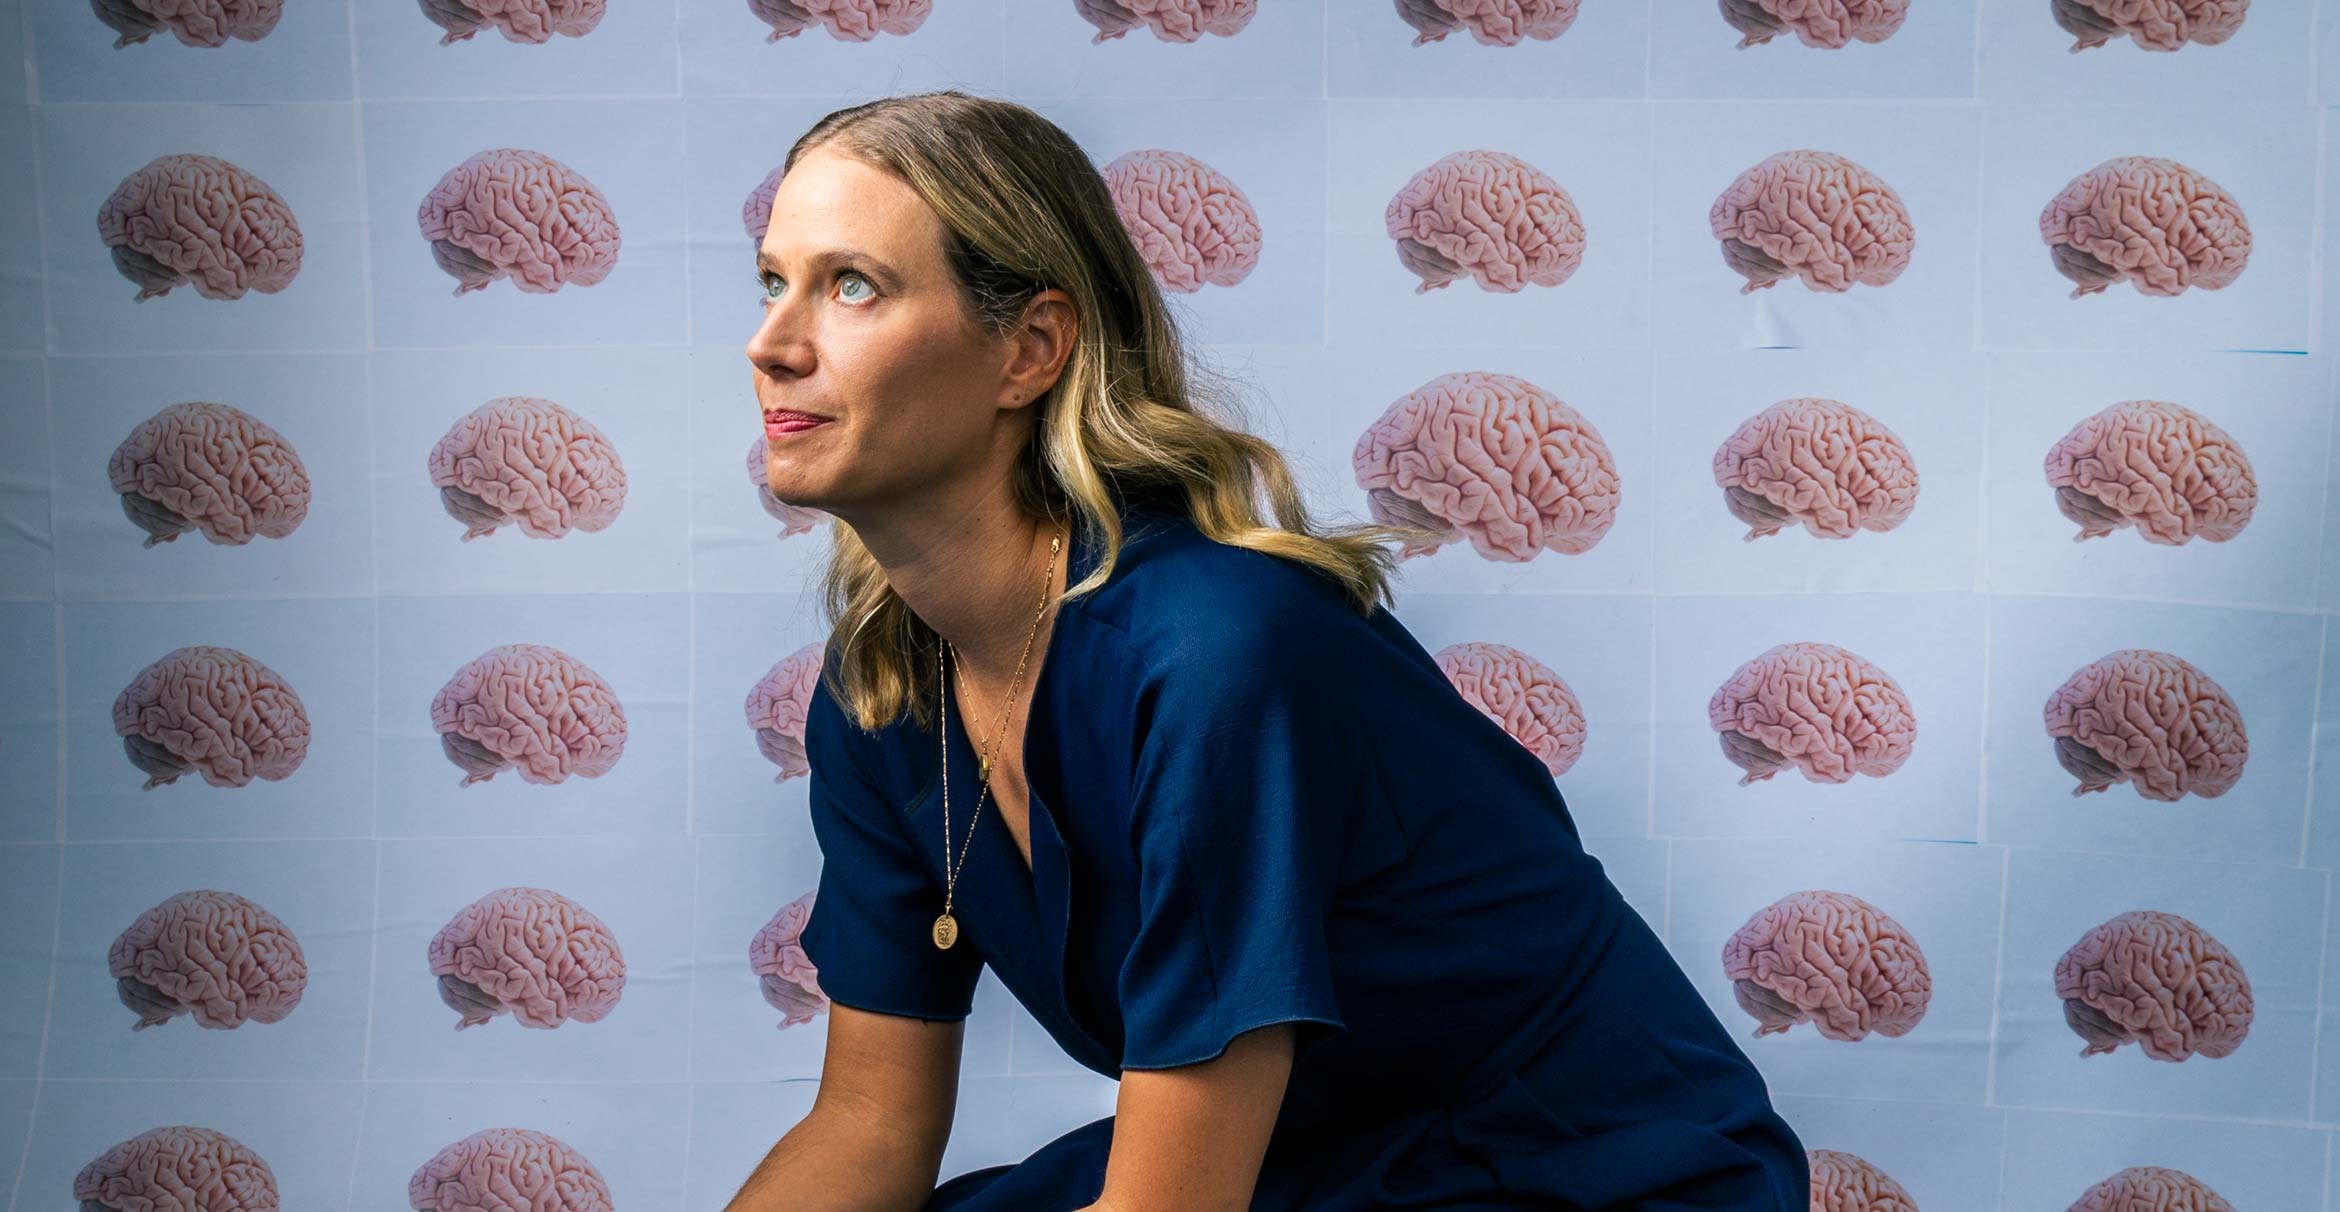 Emily Jacobs seated, looking upward, seated in front of a backdrop of brain imagery